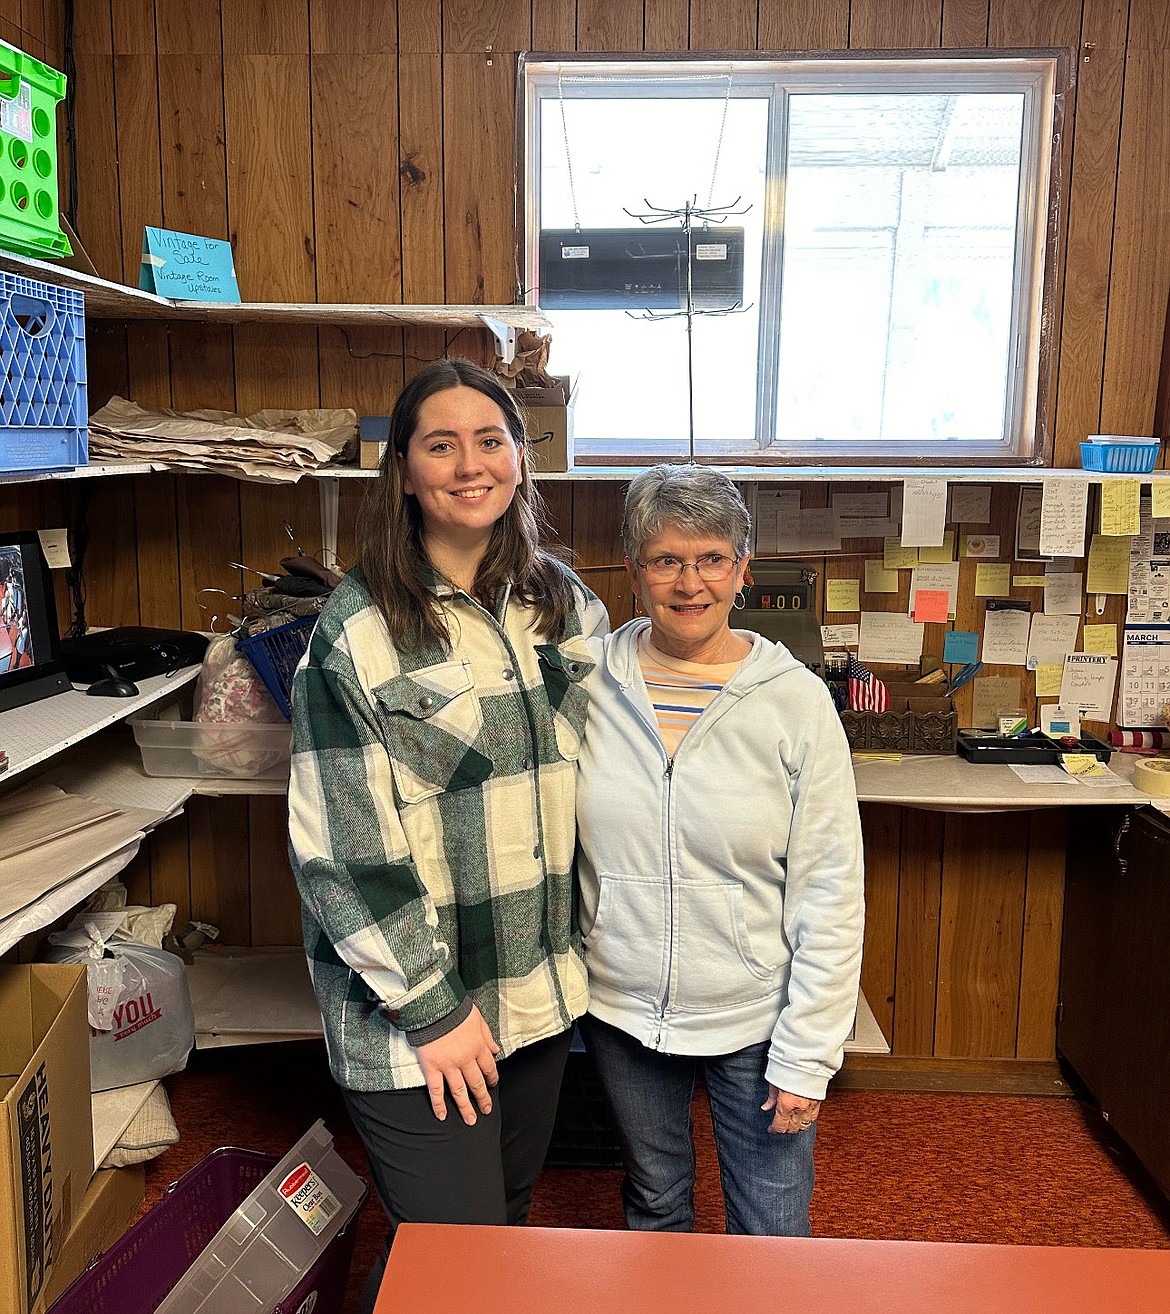 Lauren Widman stands with Kathy Verley, the manager of Women in Timber after the large haul of donations was brought into the store back in March. (Photo courtesy/Lauren Widman)